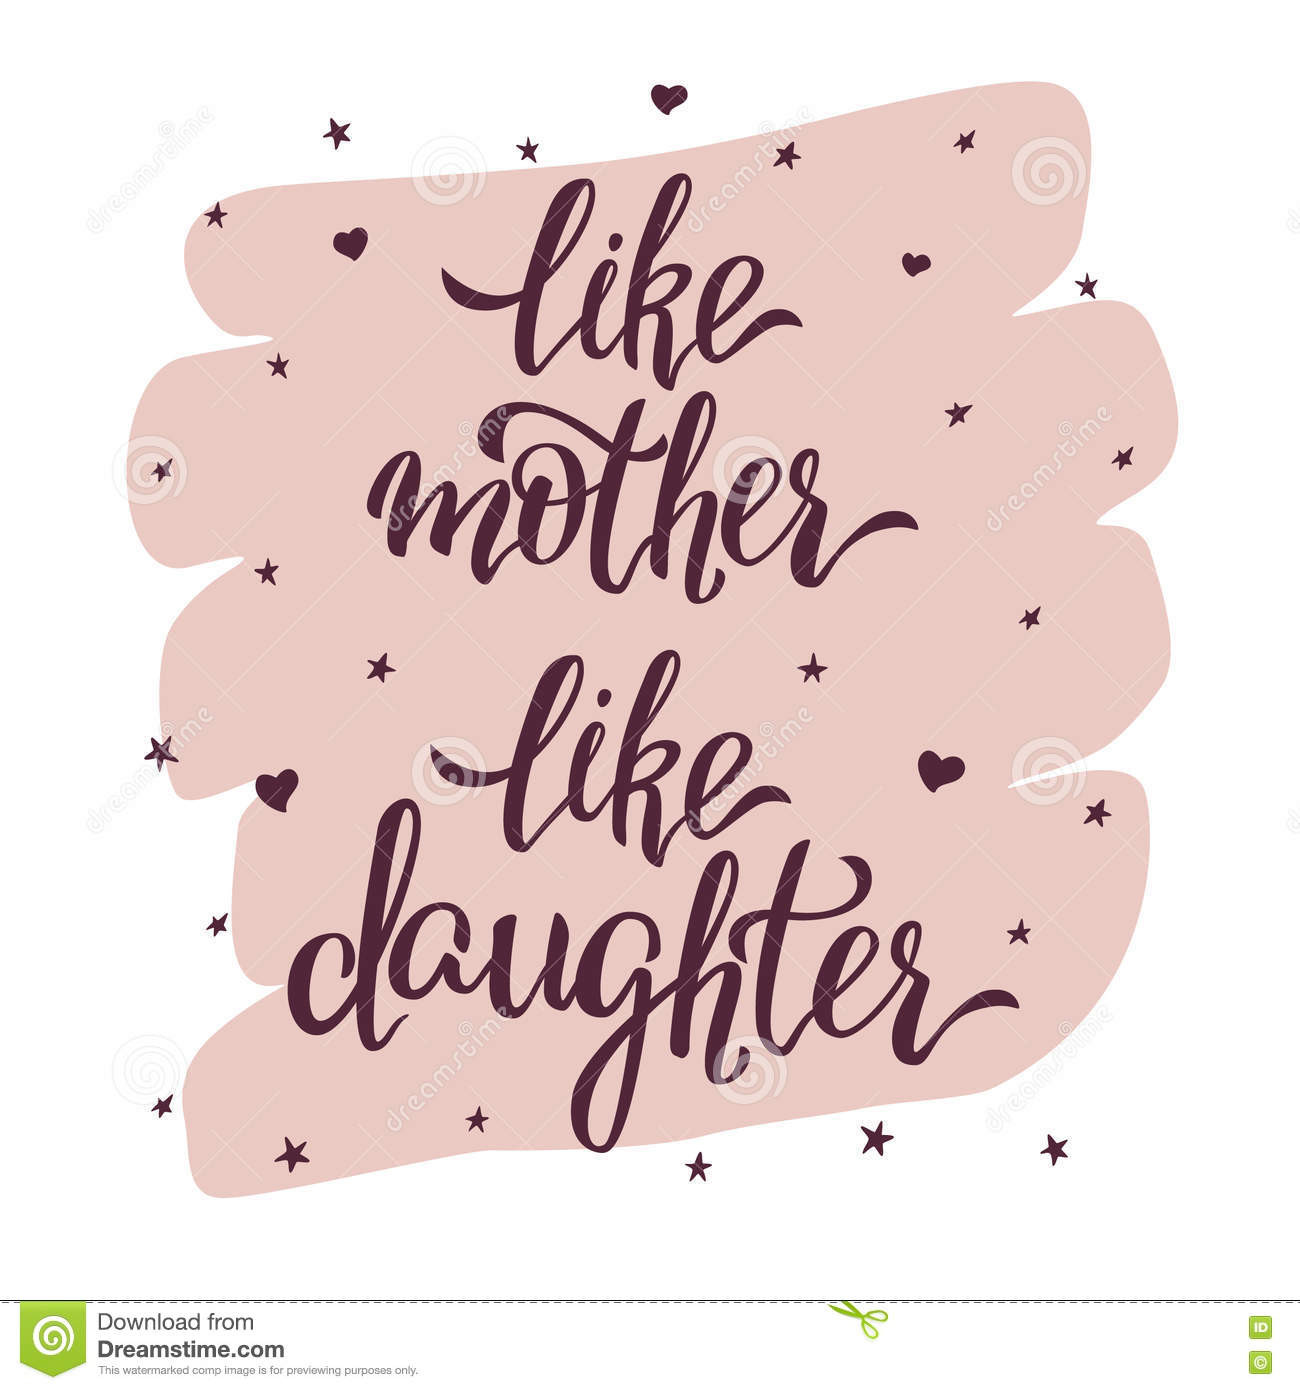 Like Mother Like Daughters Quotes
 Like mother like daughter stock illustration Illustration